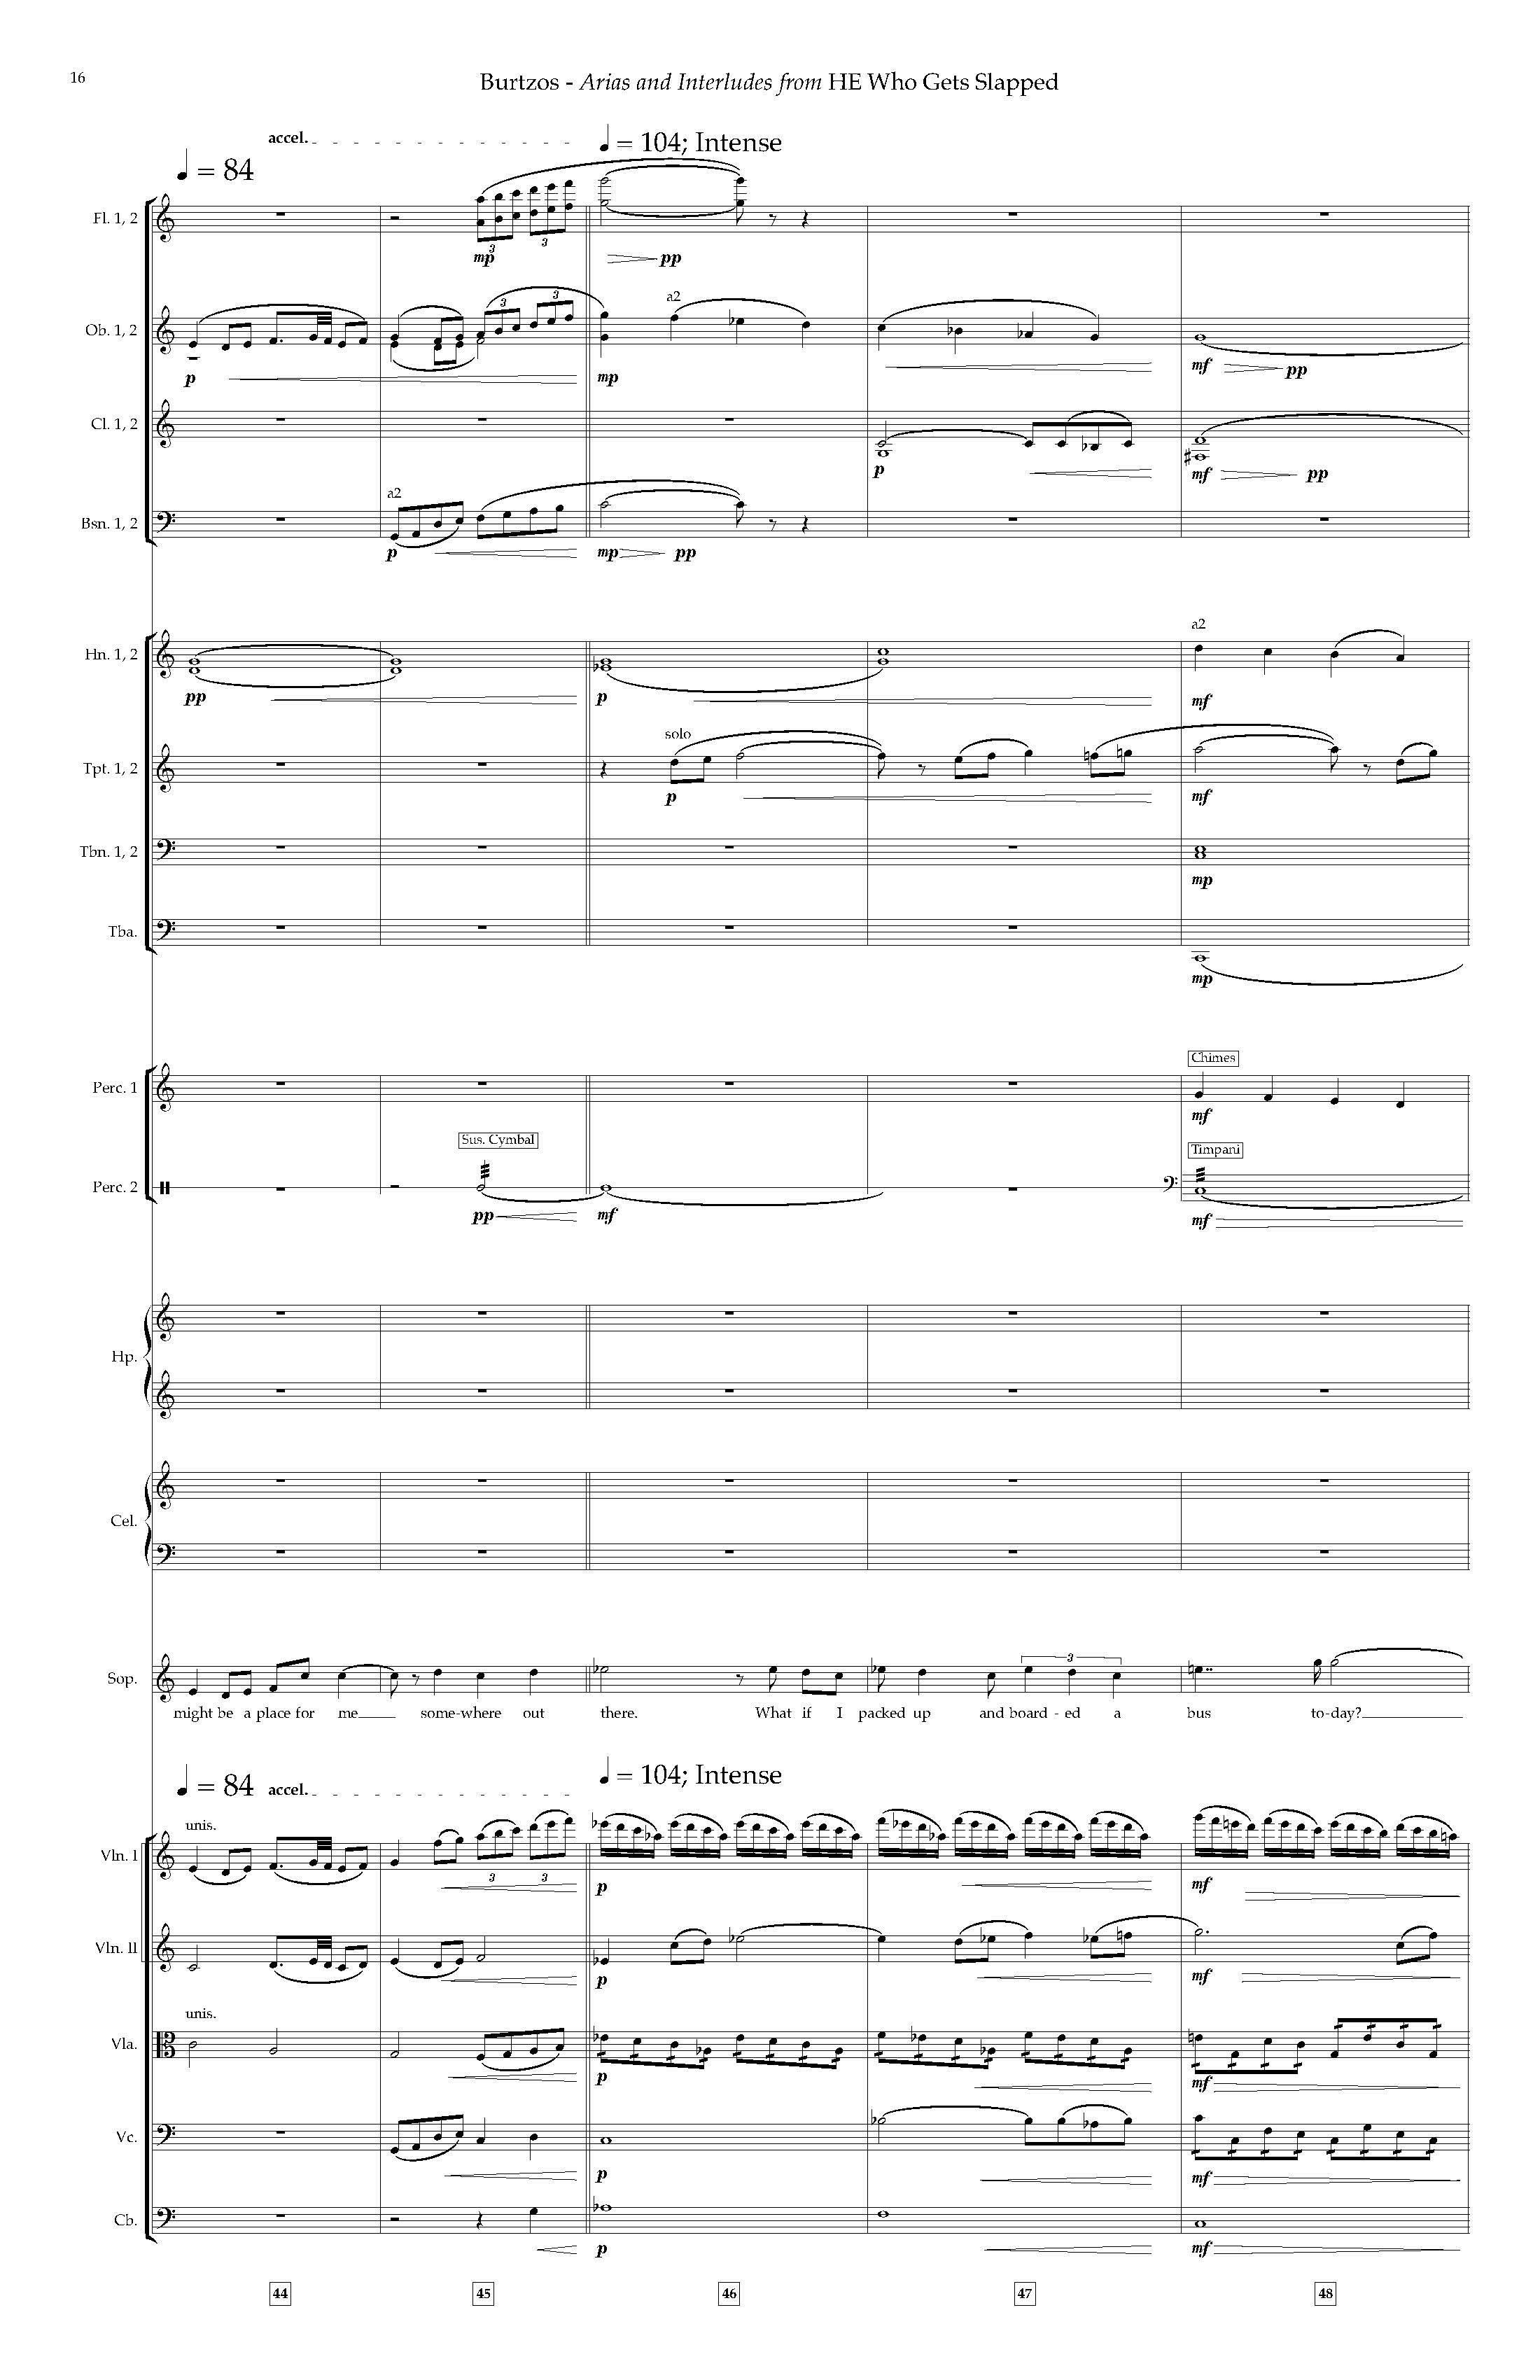 Arias and Interludes from HWGS - Complete Score_Page_22.jpg